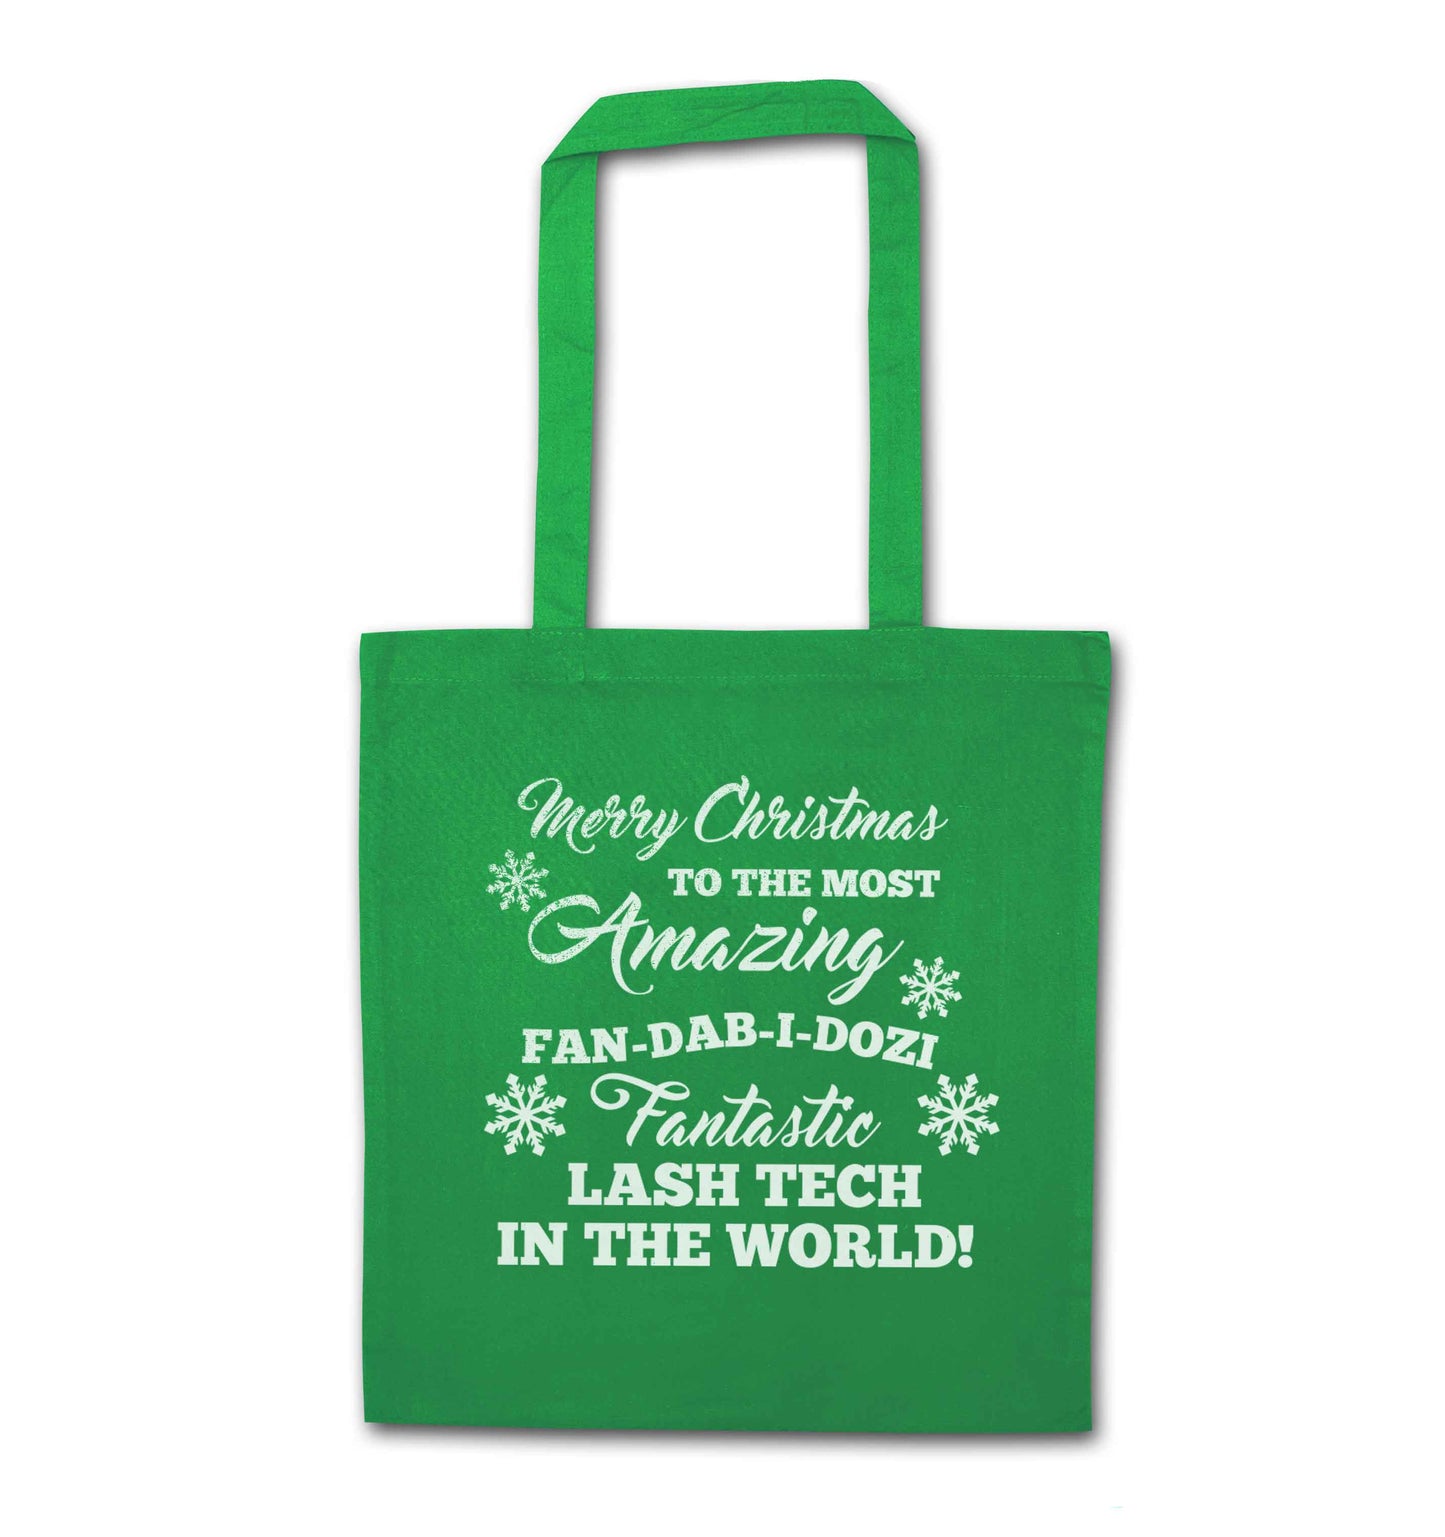 Merry Christmas to the most amazing fan-dab-i-dozi fantasic lash tech in the world green tote bag